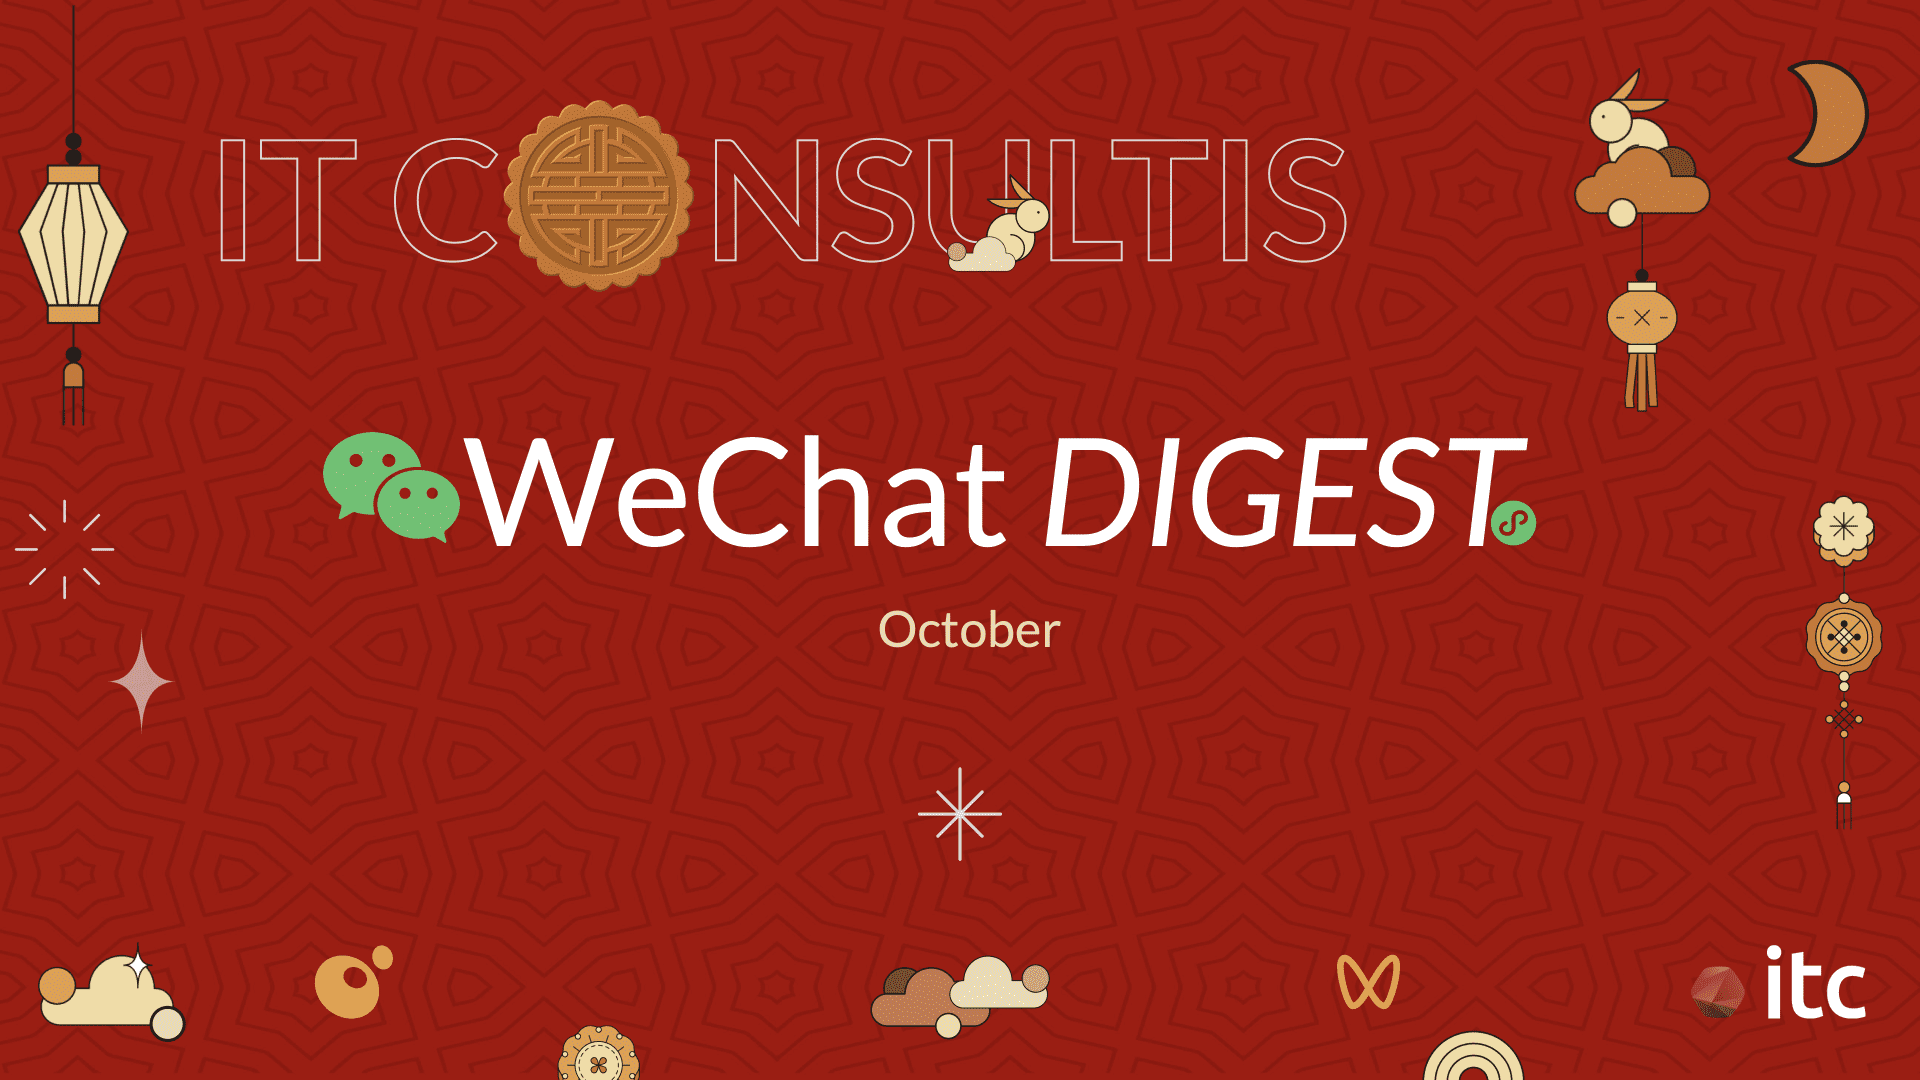 IT Consultis - WeChat Digest [ October ]